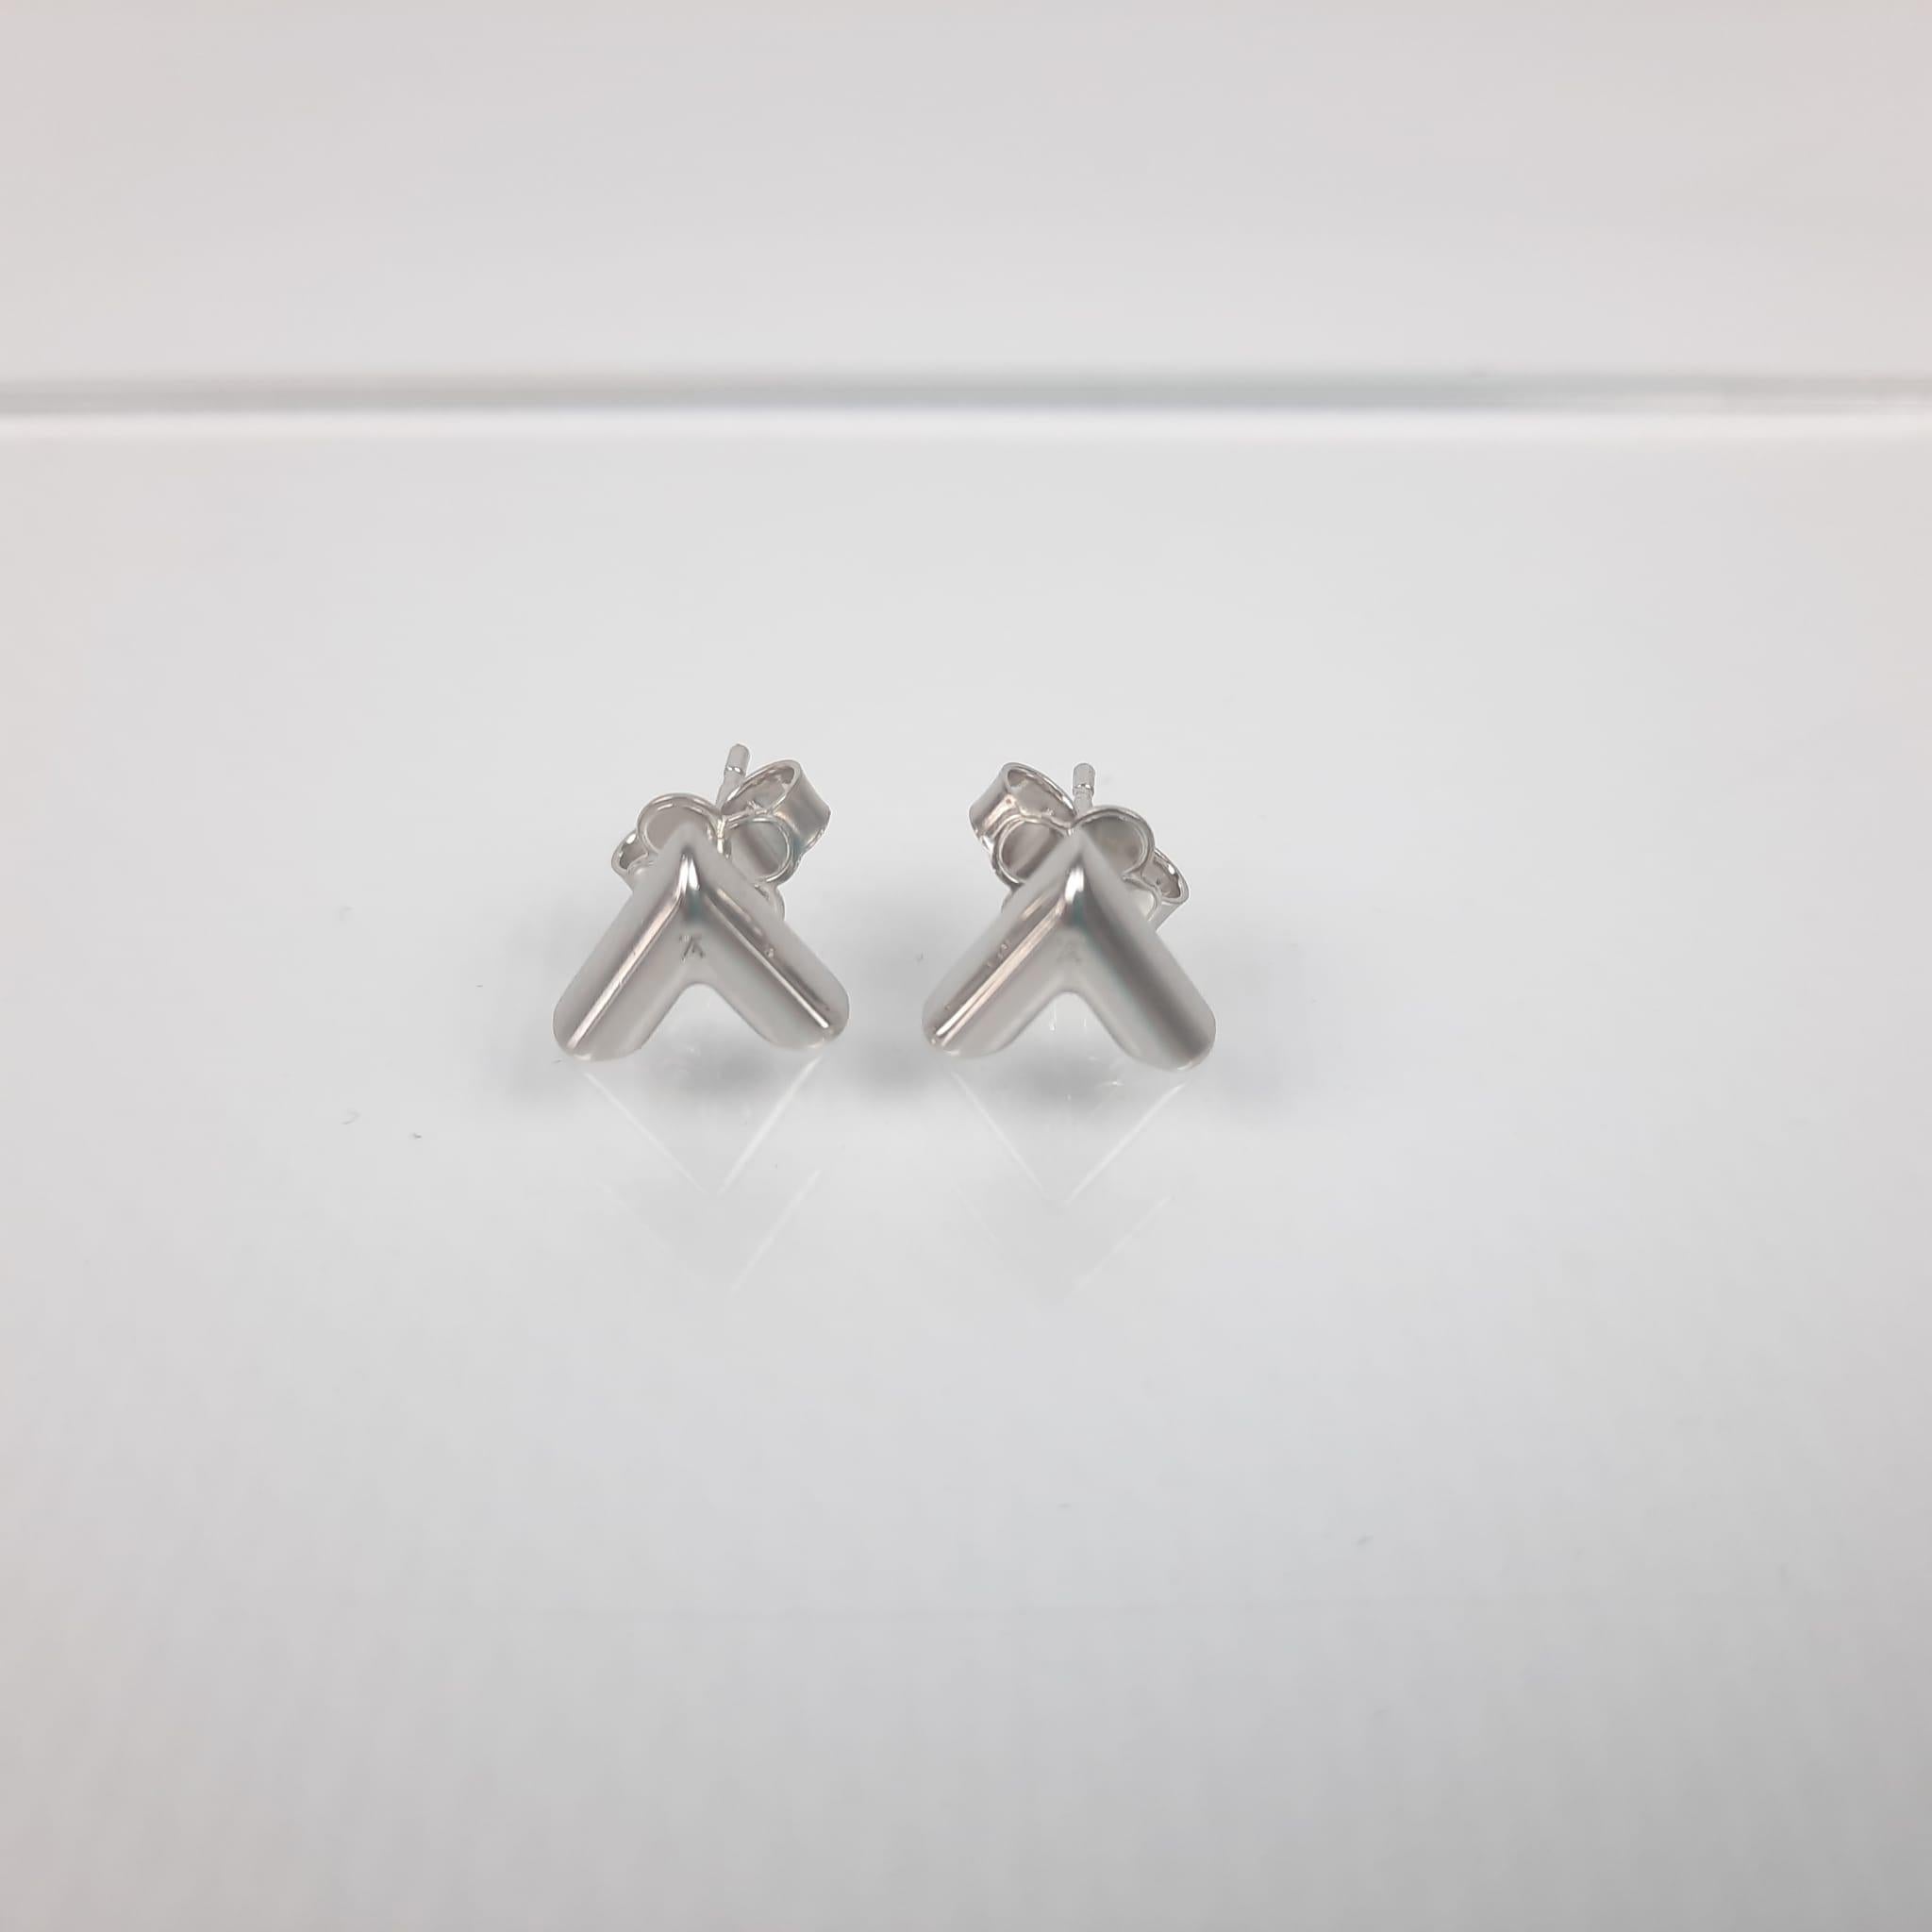 Sublimated by a discreet signature and a shiny silver-colour finish, the Essential V earrings are in tune with the times. These sleek and versatile earrings combine Louis Vuitton's graphic V motif and LV engraving.
Length: ~0.9 cm/0.3 inches
Metal